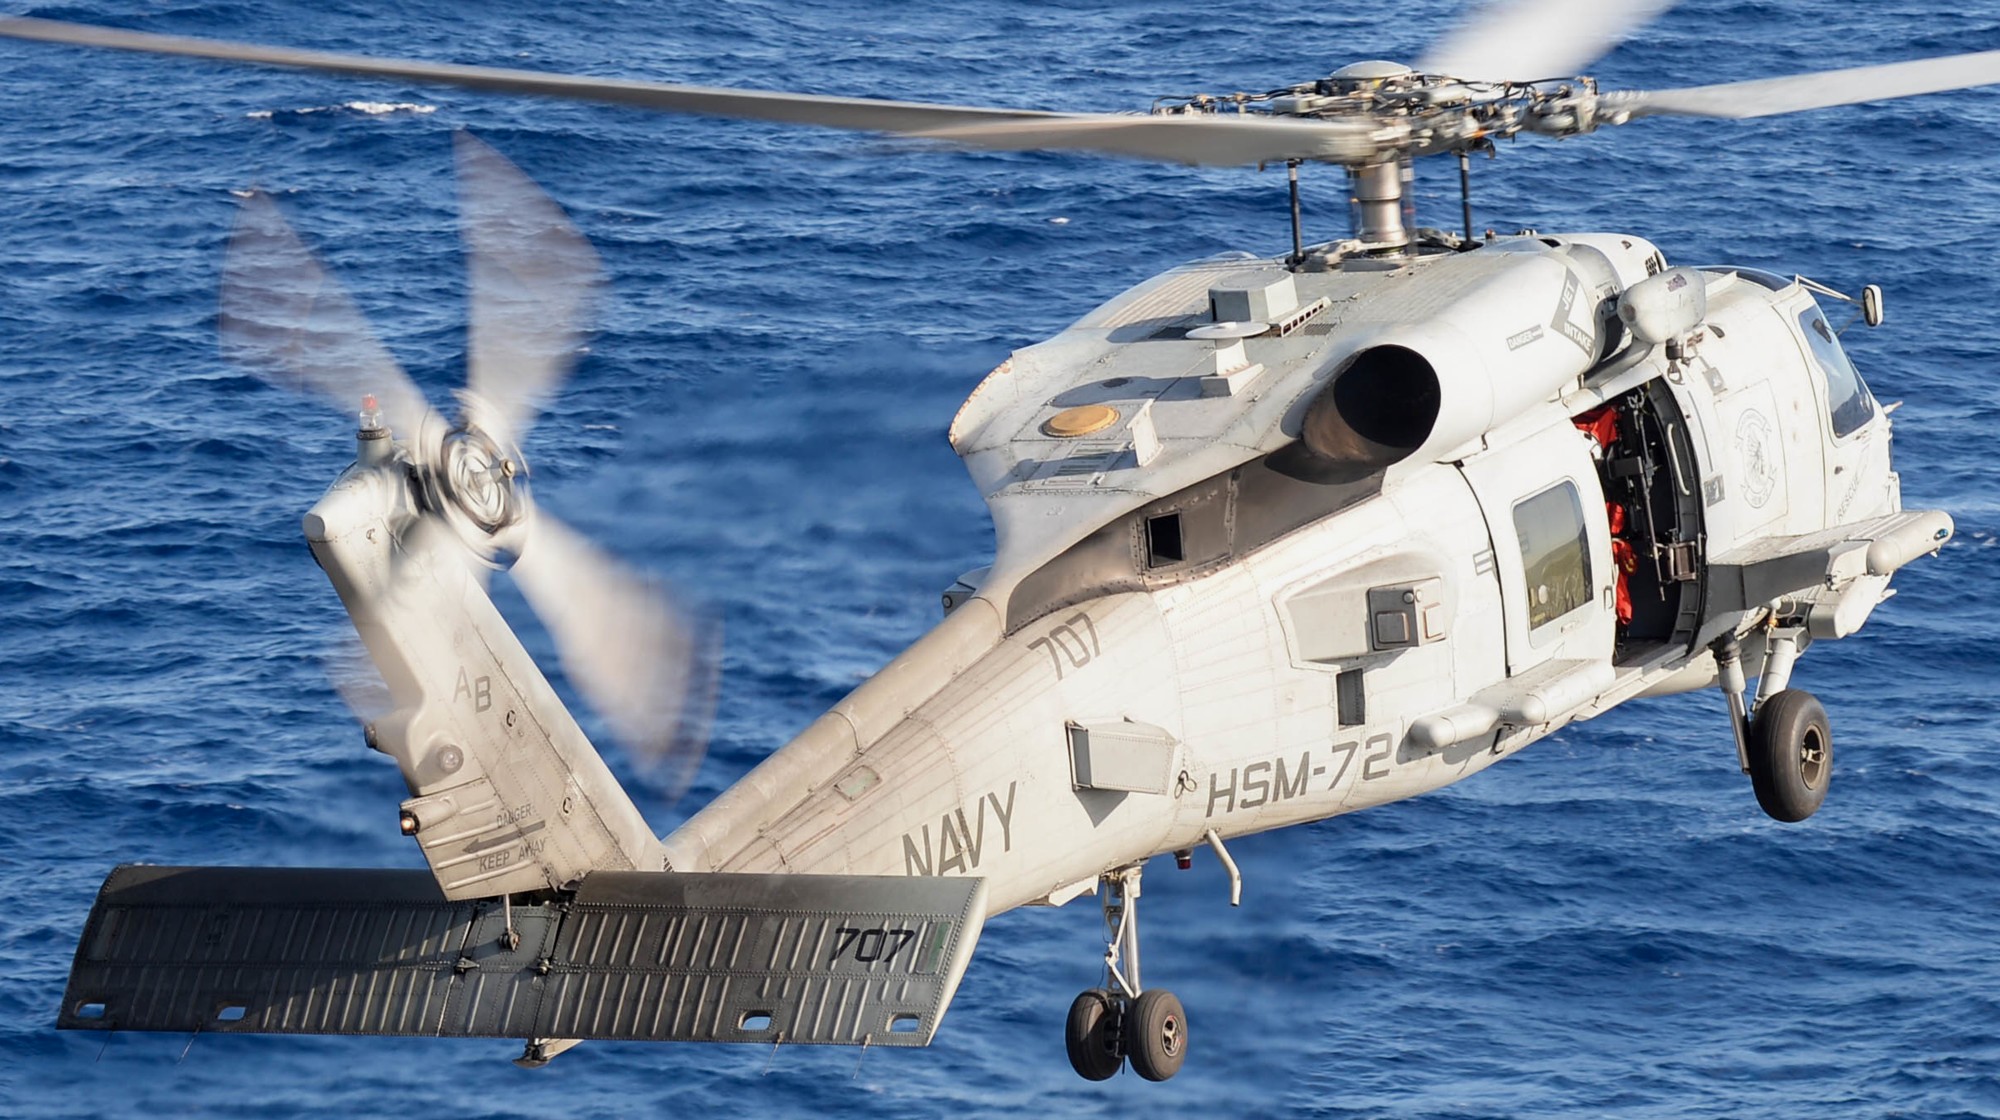 hsm-72 proud warriors helicopter maritime strike squadron mh-60r seahawk carrier air wing cvw-1 cvn-75 uss harry s. truman 45